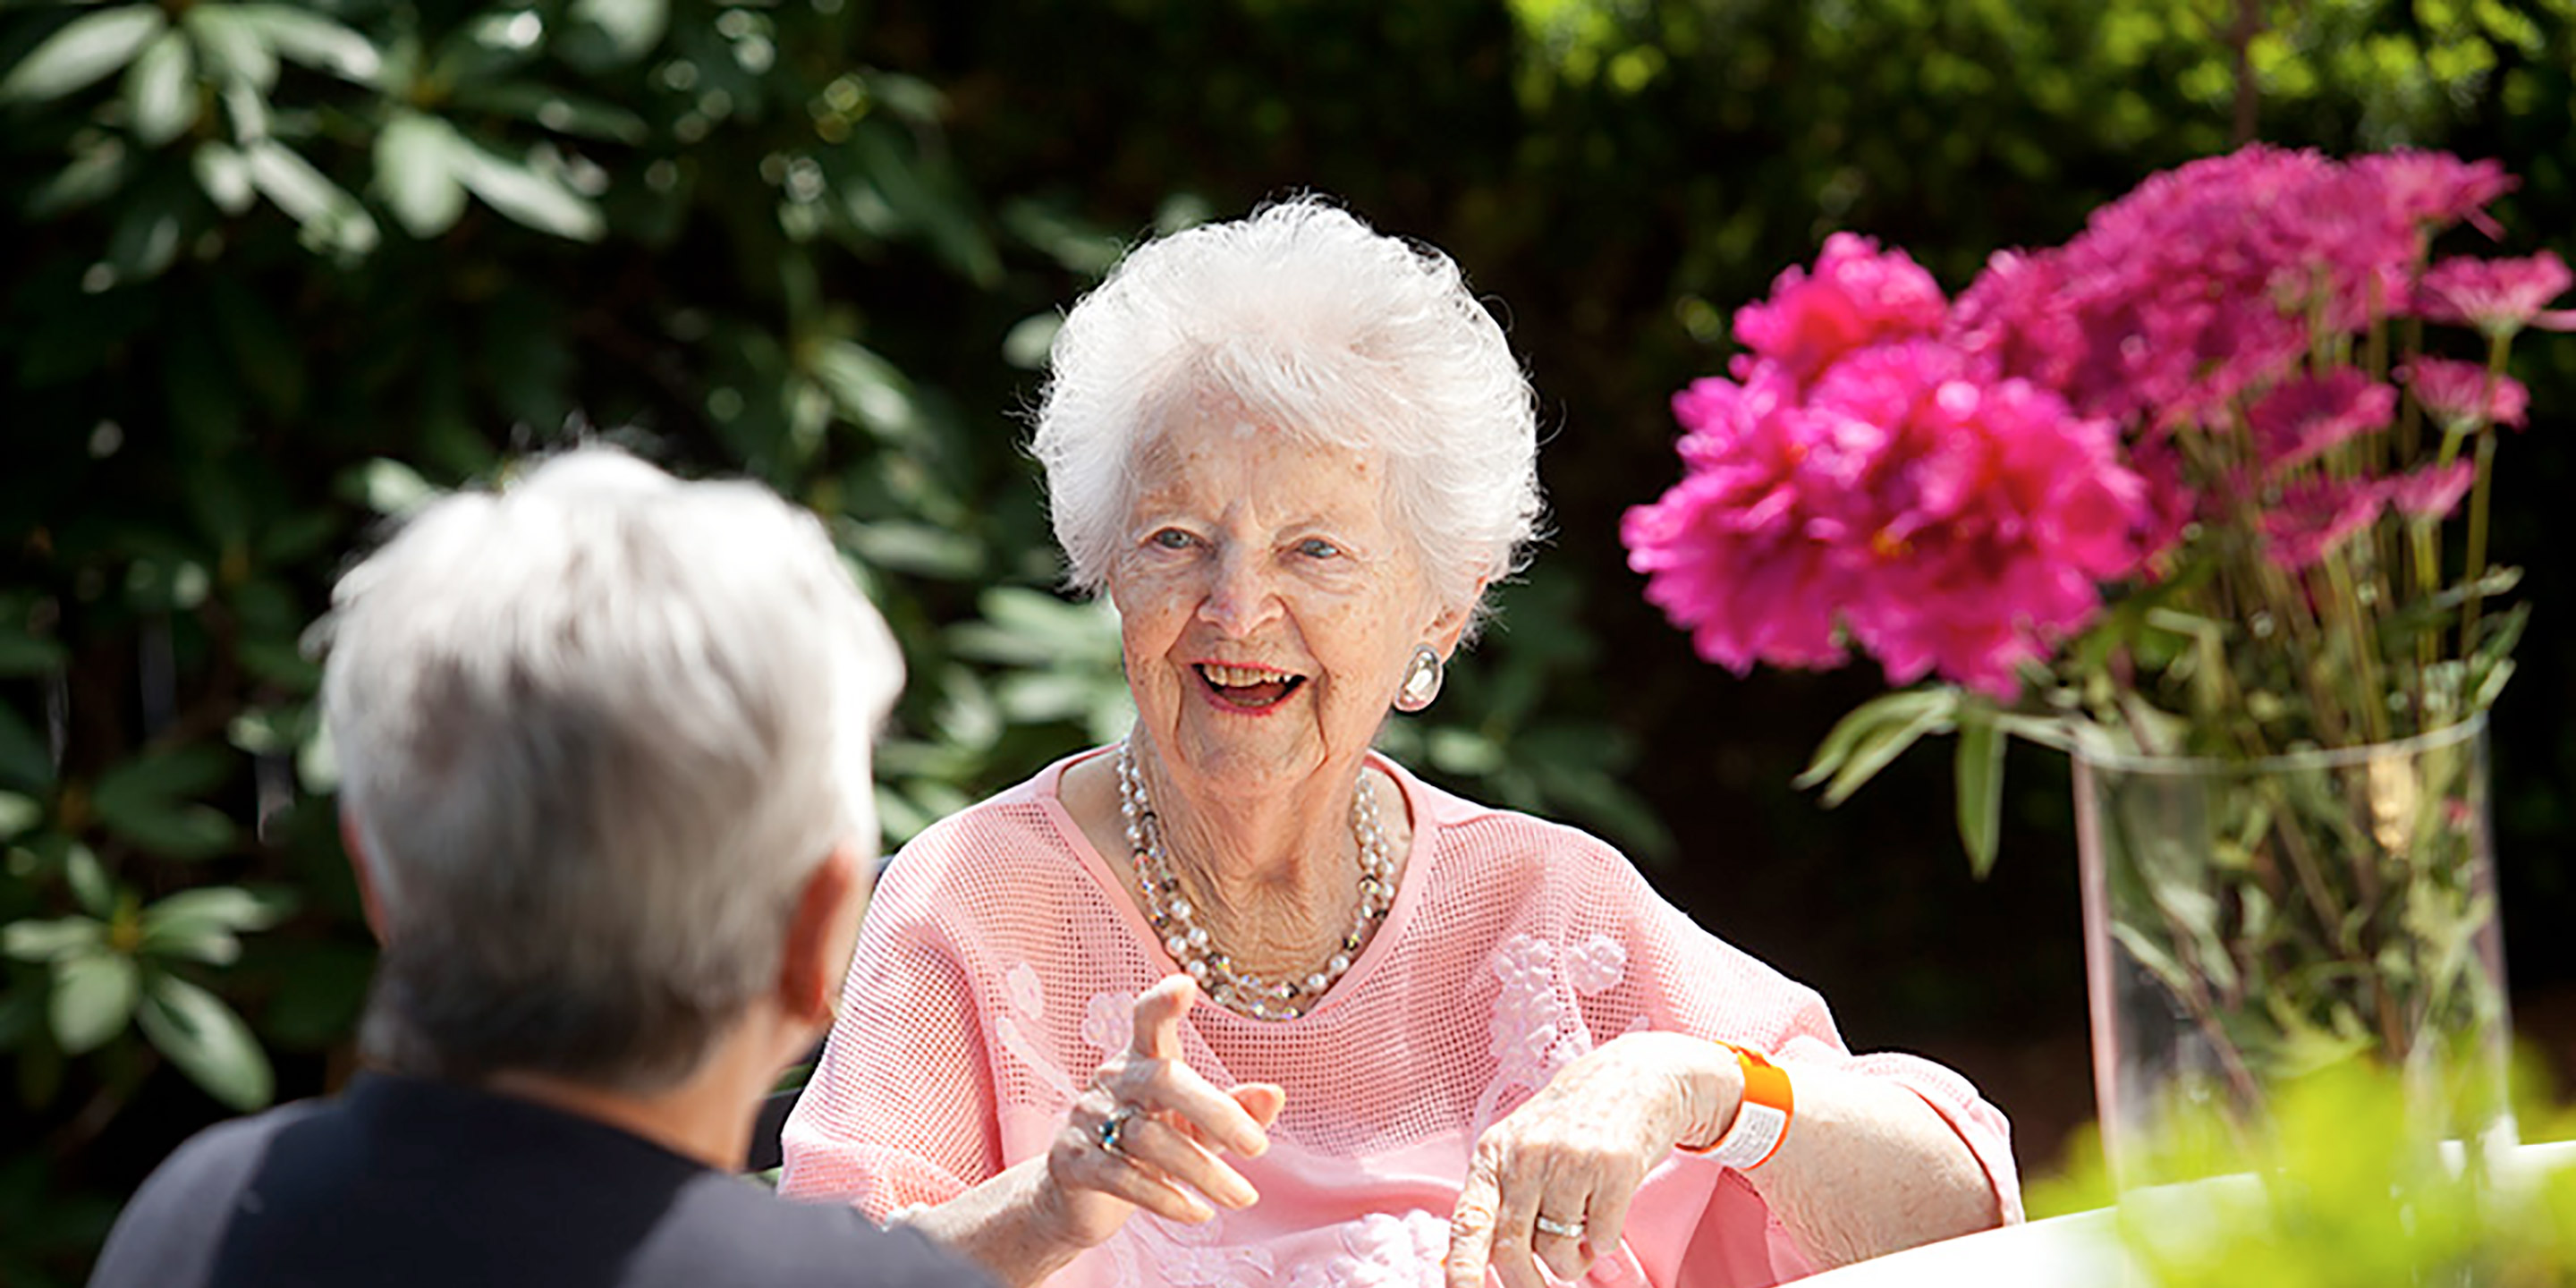 An elder woman wearing a pink shirt sits around a table outside and talks with another woman.